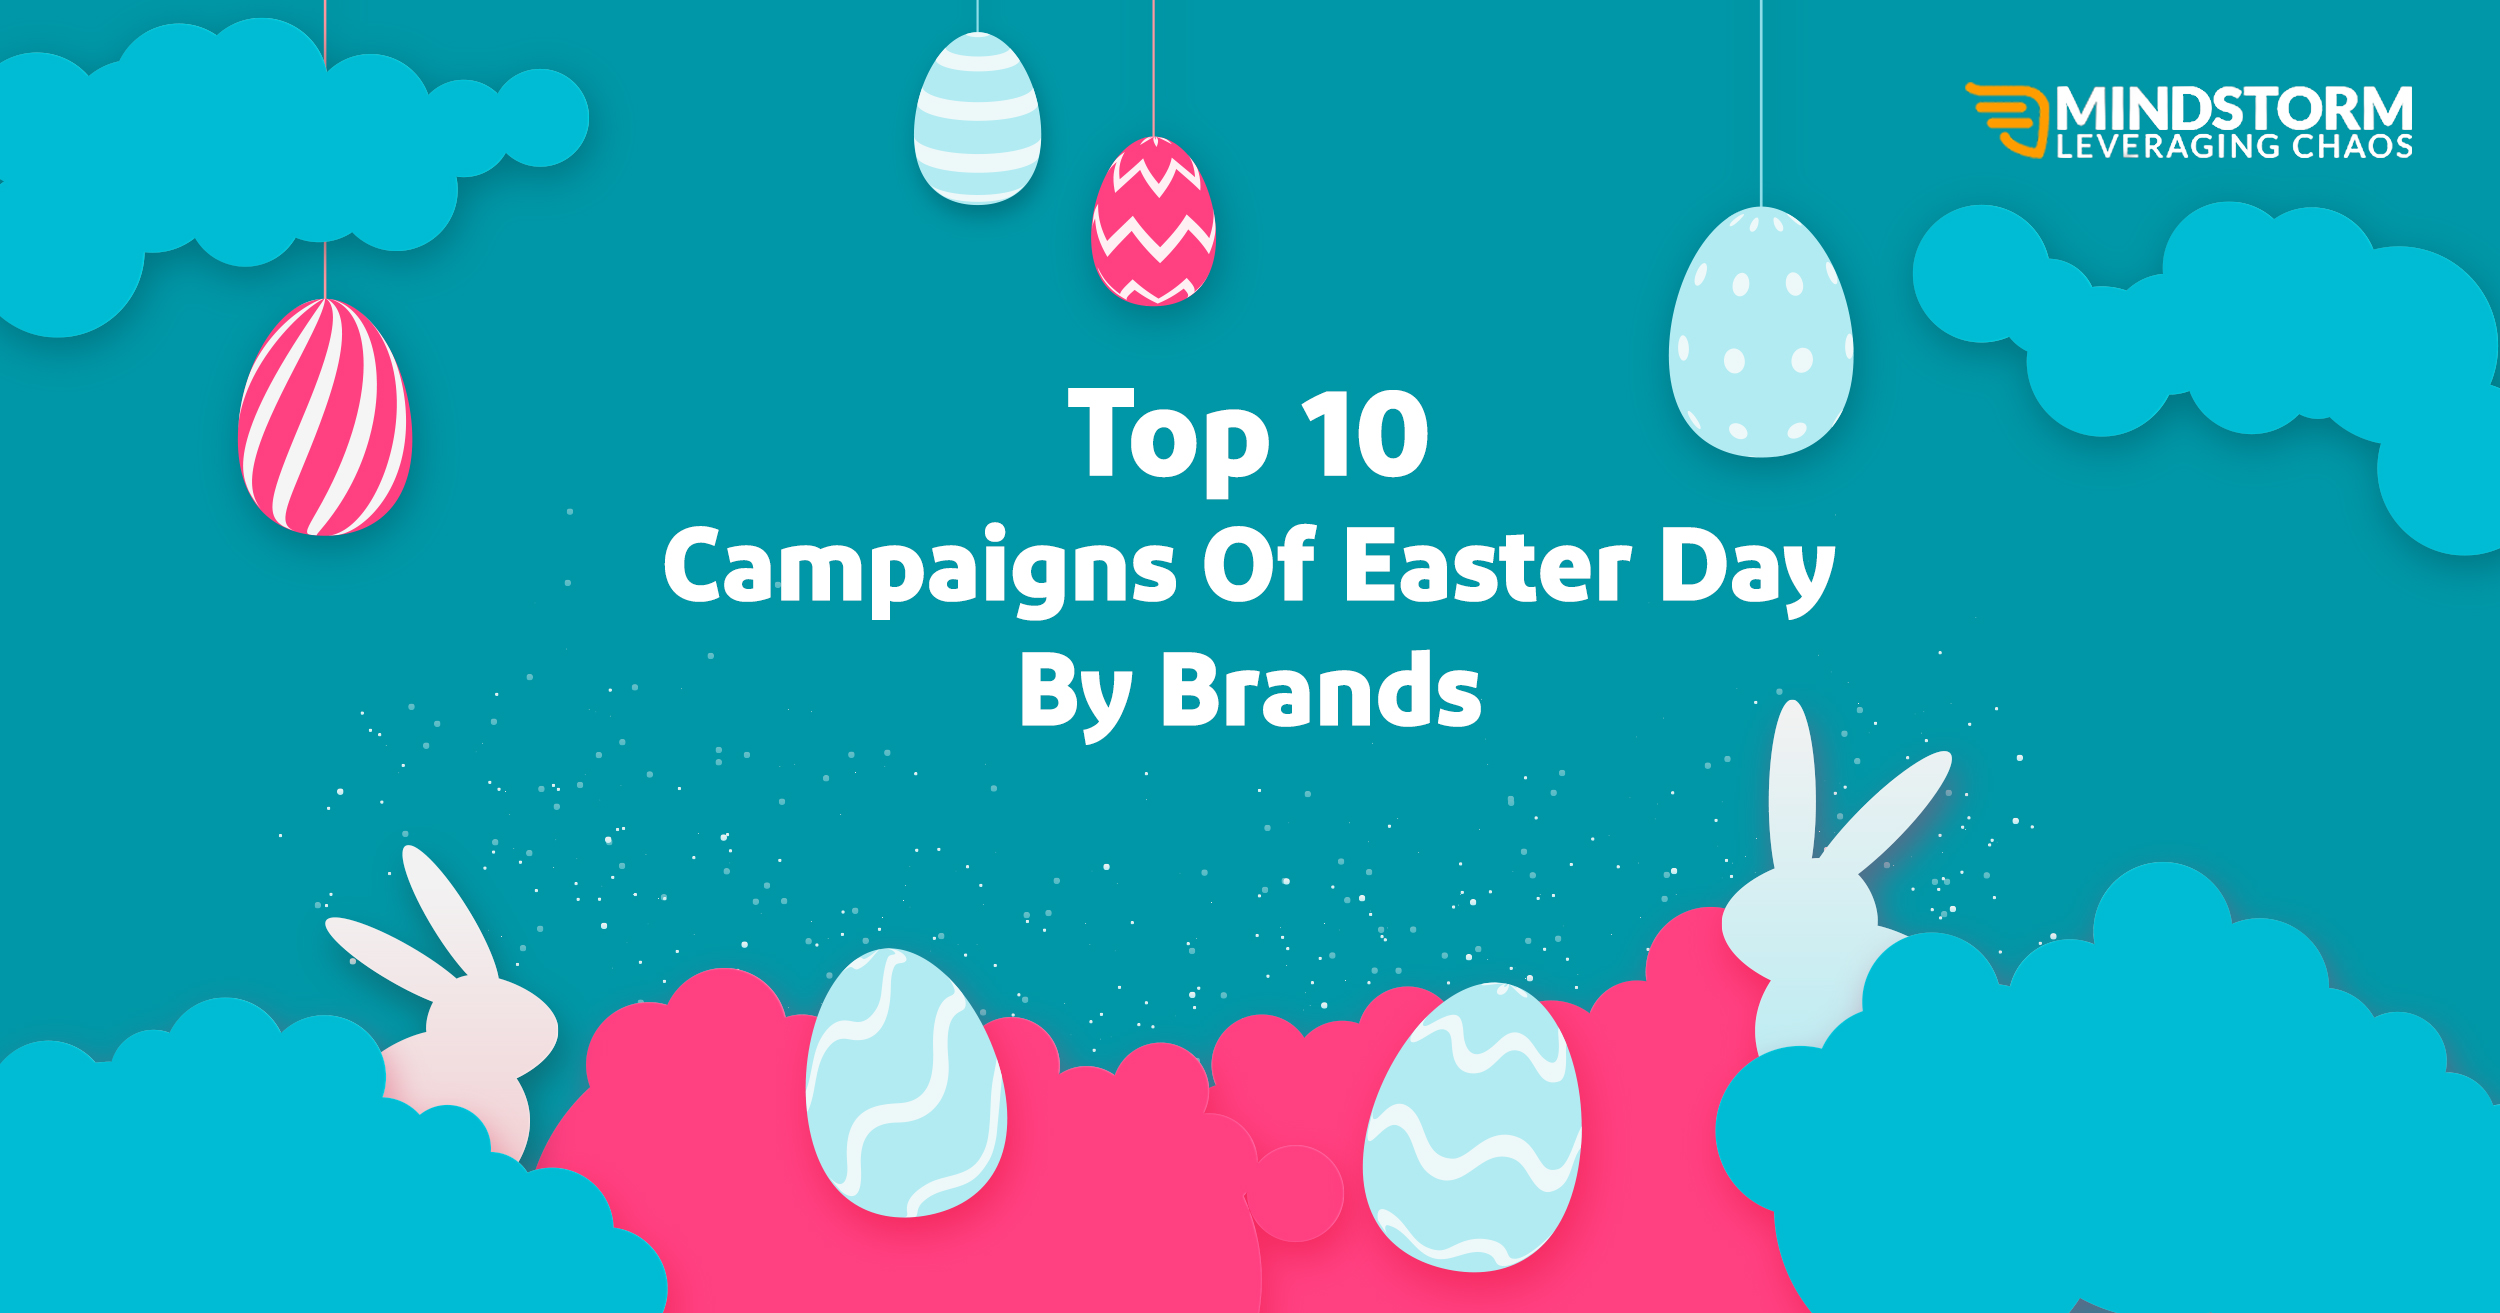 Top 10 Campaigns of Easter Day by Brands